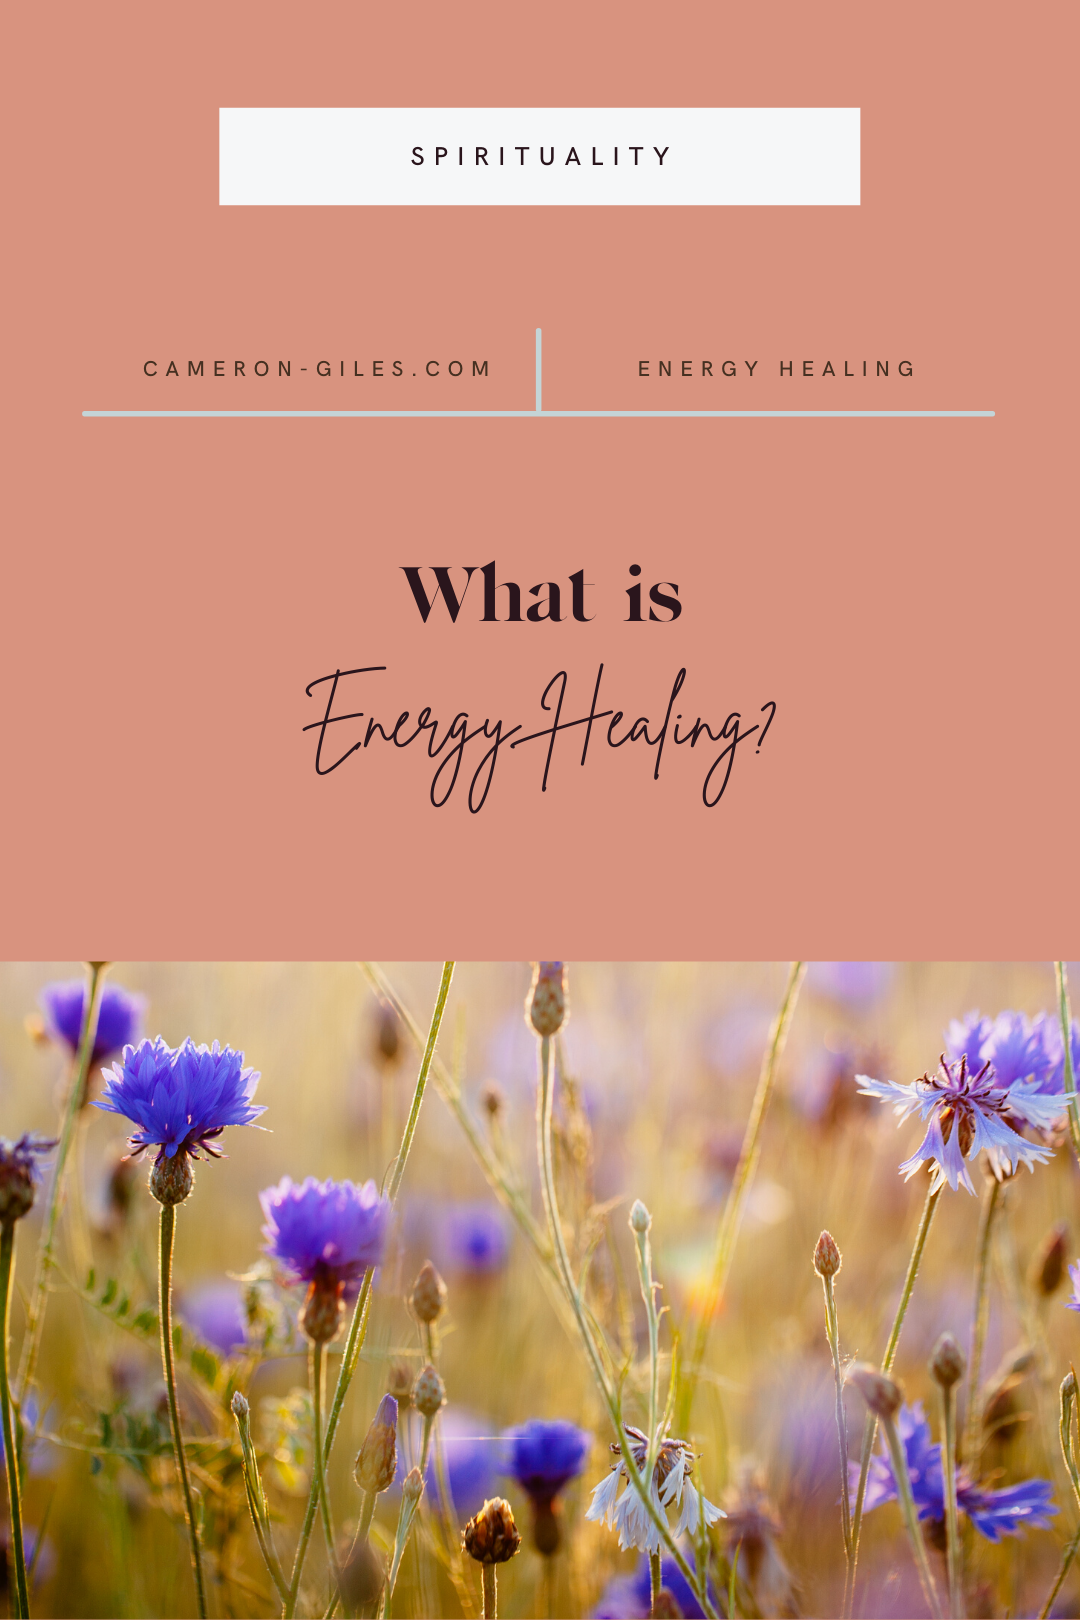 What is energy healing